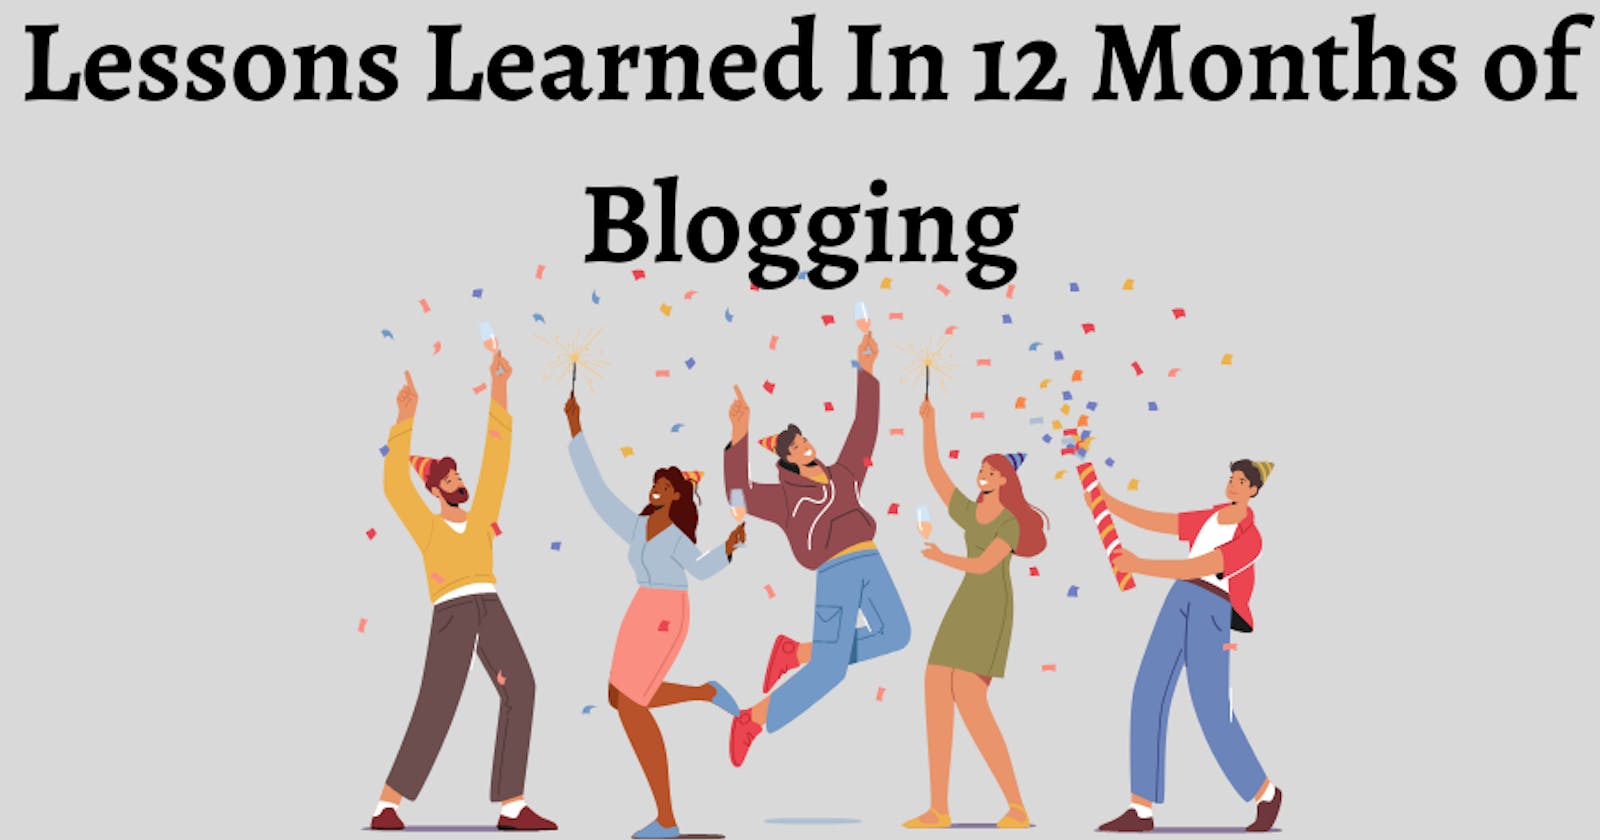 Lessons Learned In 12 Months of Blogging